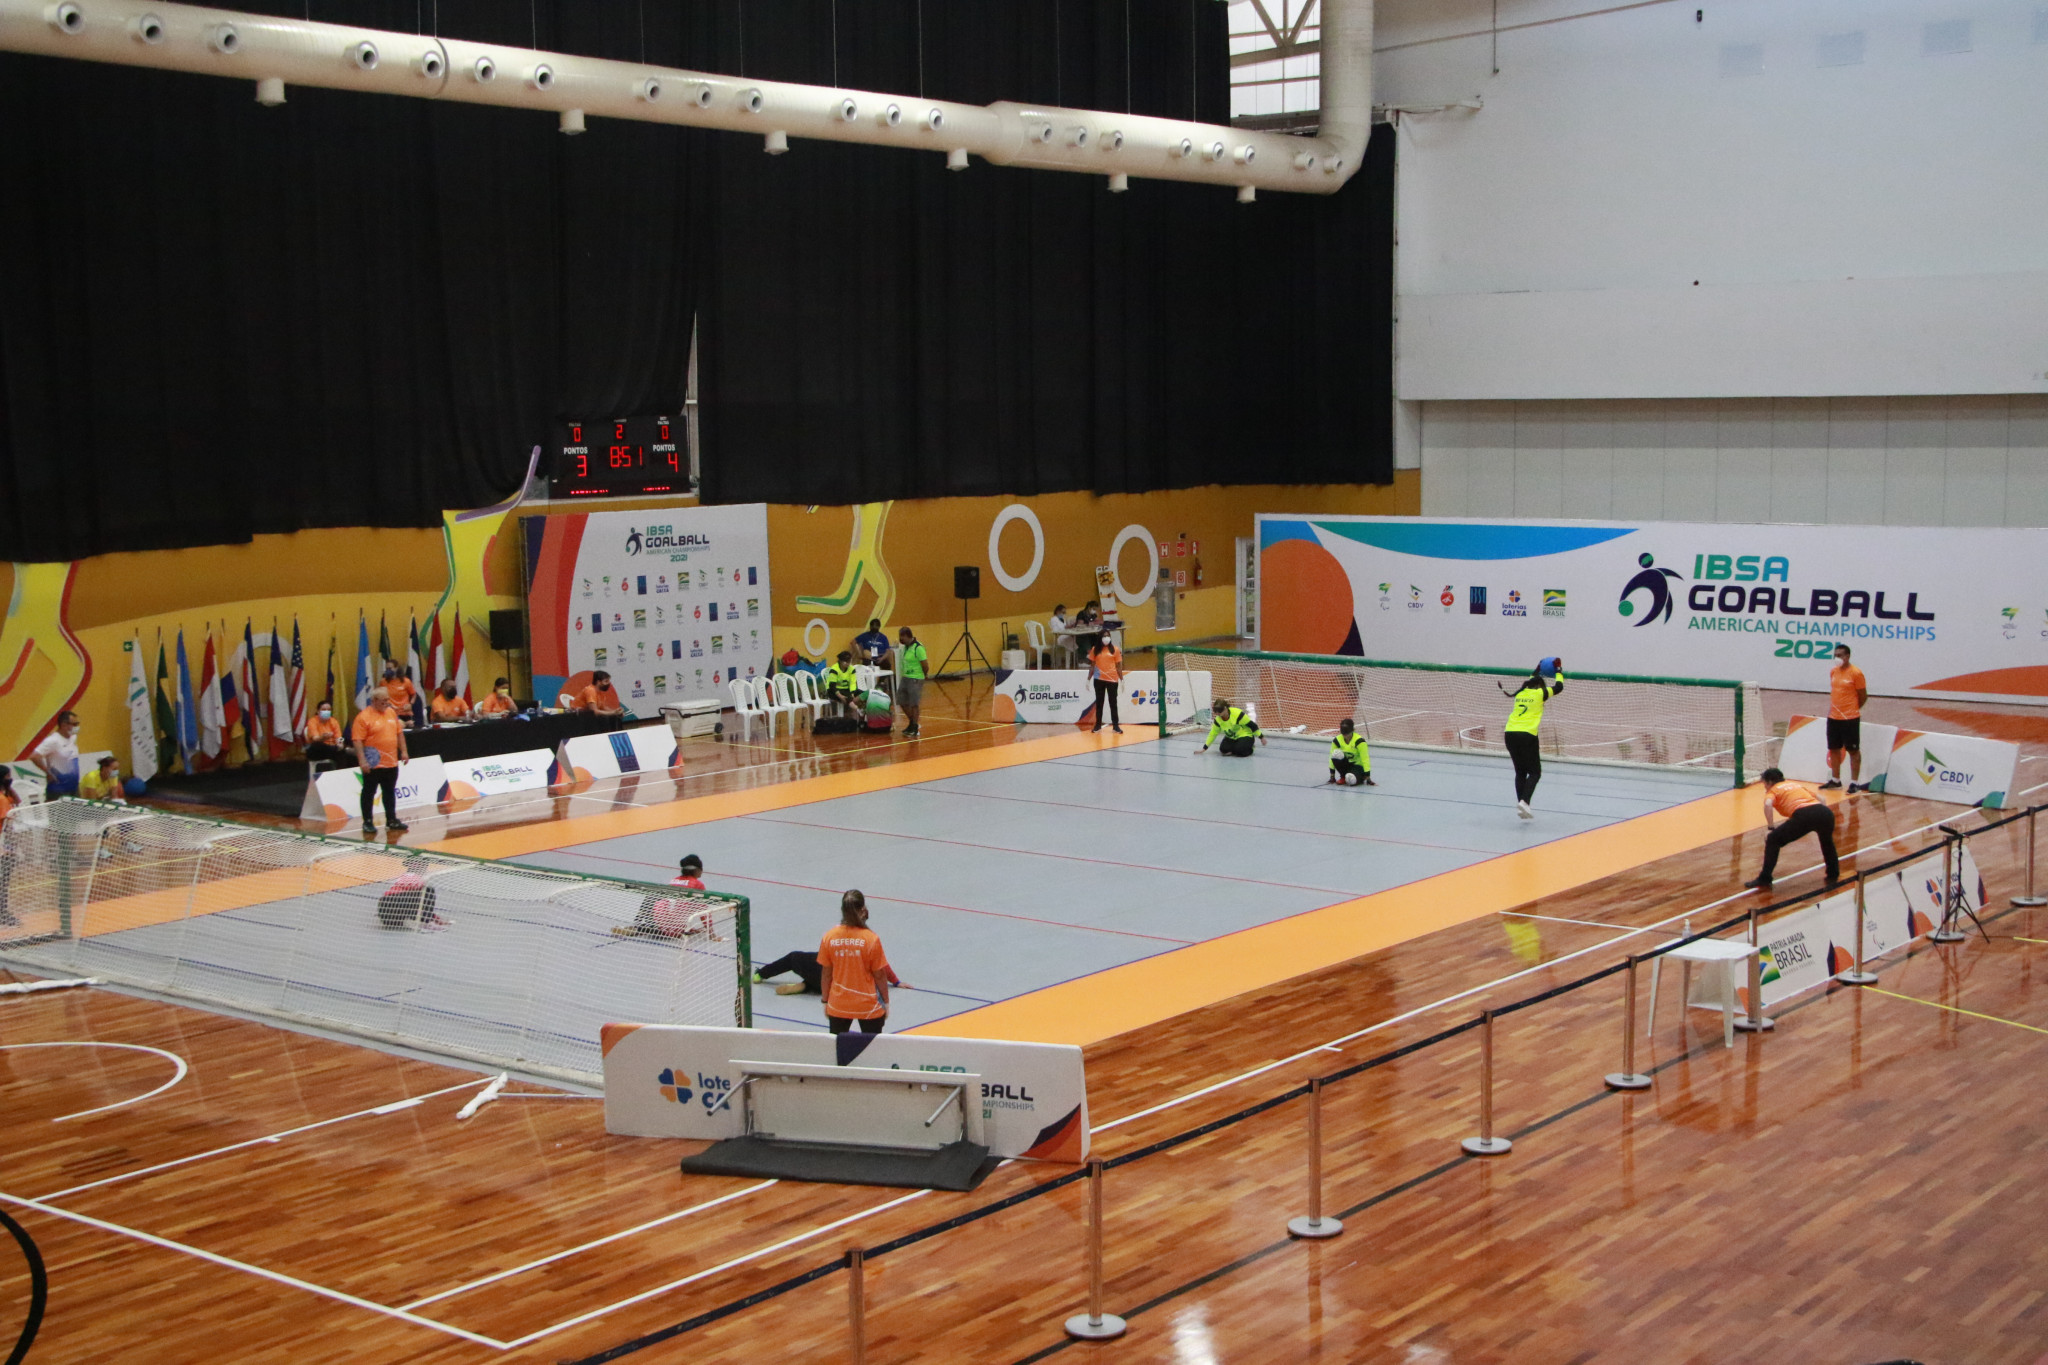 Brazil ease into quarter-finals at home IBSA Goalball Americas Championships